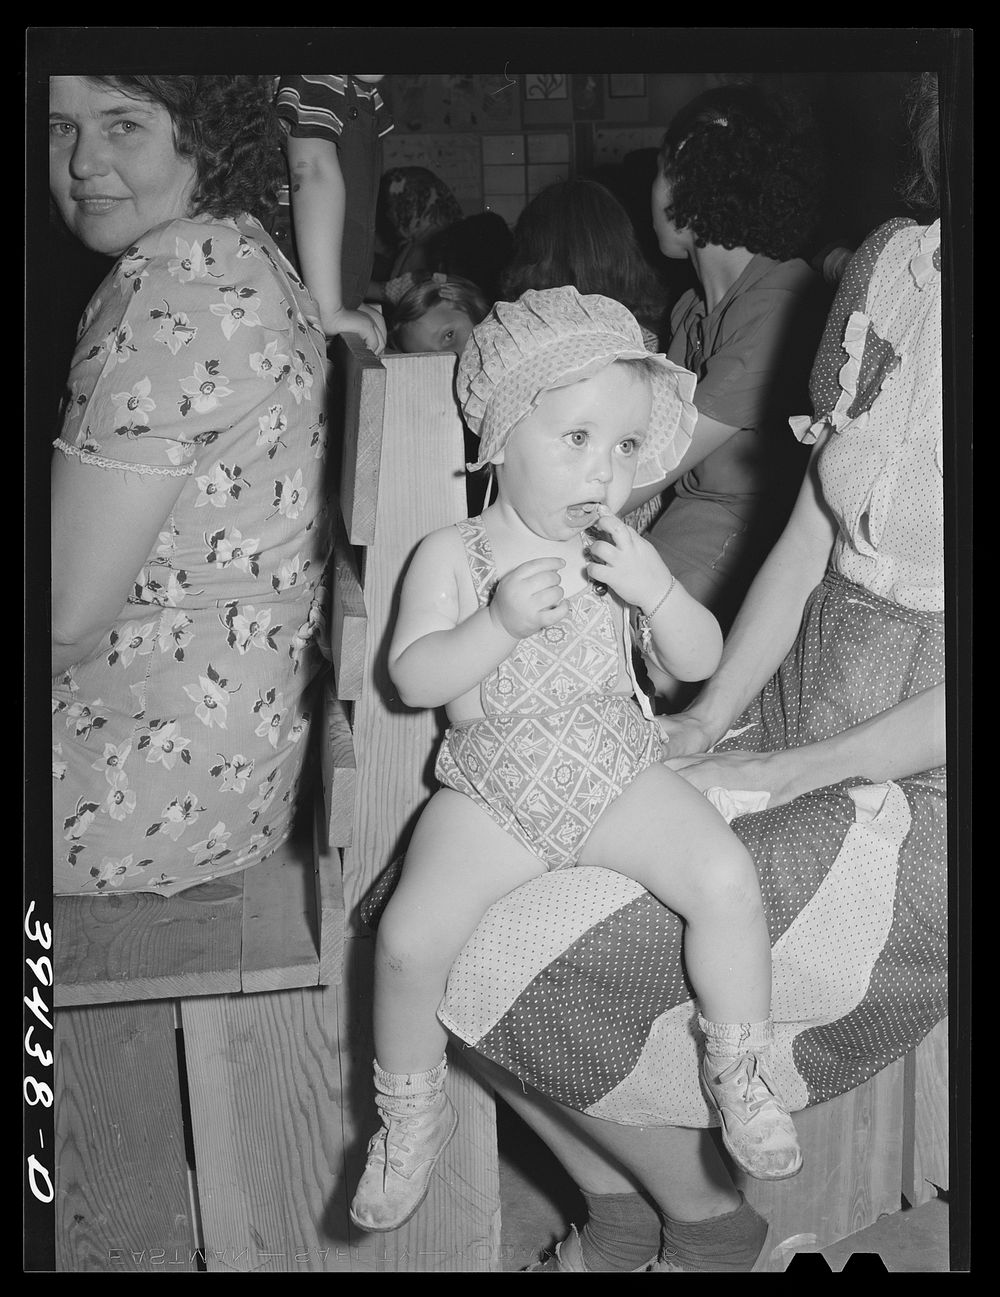 Child of family of farm laborers living at the FSA (Farm Security Administration) labor camp. Caldwell, Idaho by Russell Lee